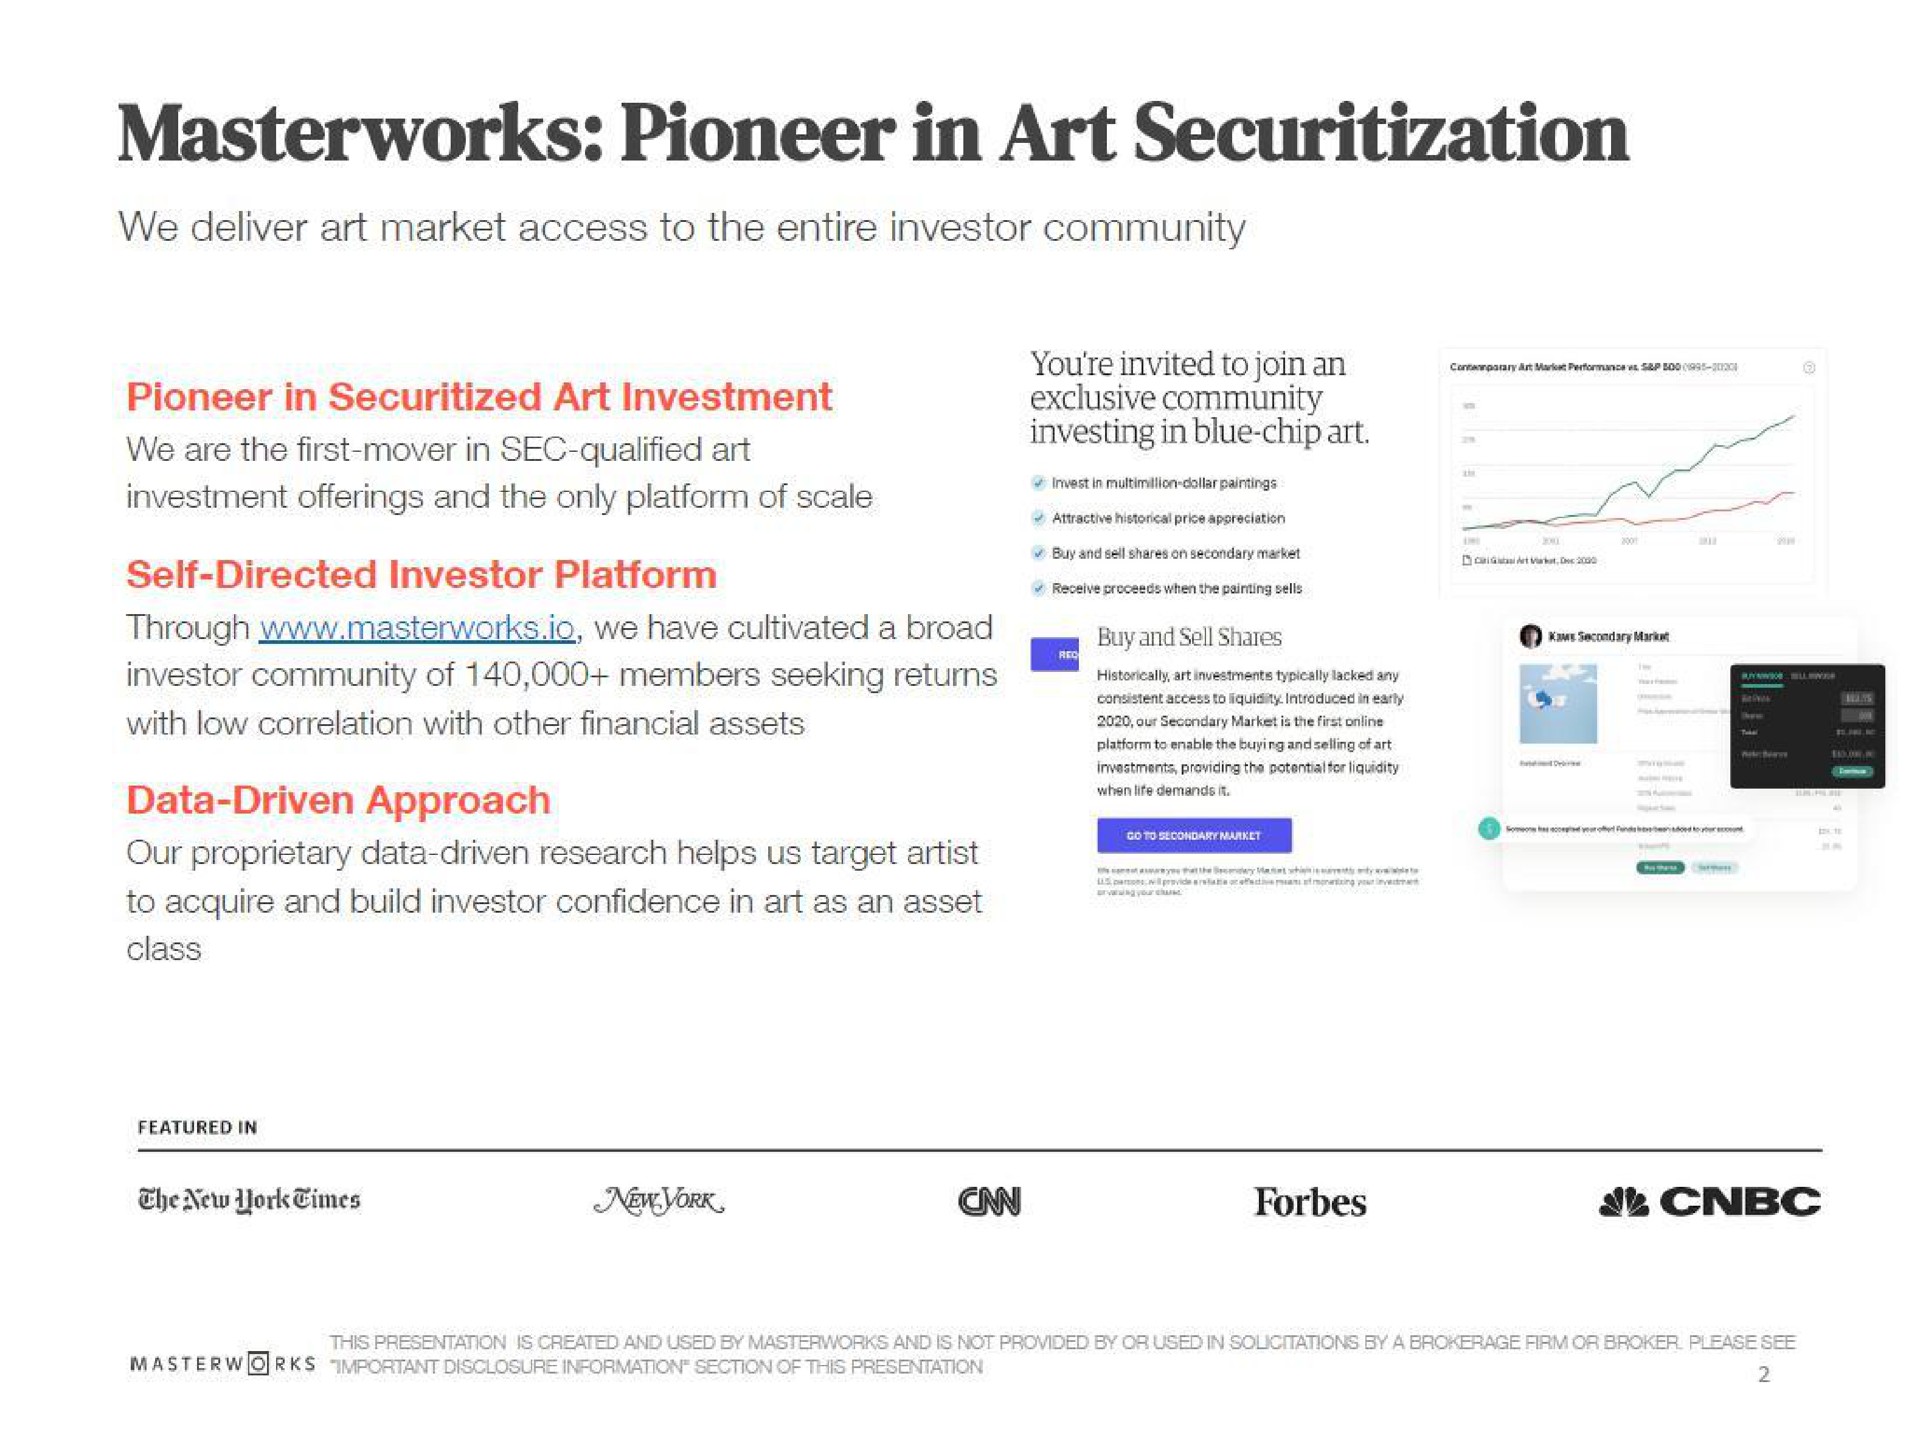 pioneer in art we deliver art market access to the entire investor community pioneer in art investment we are the first mover in sec qualified art investment offerings and the only platform of scale exclusive community investing dive chip a data driven approach our proprietary data driven research helps us target artist eels | Masterworks